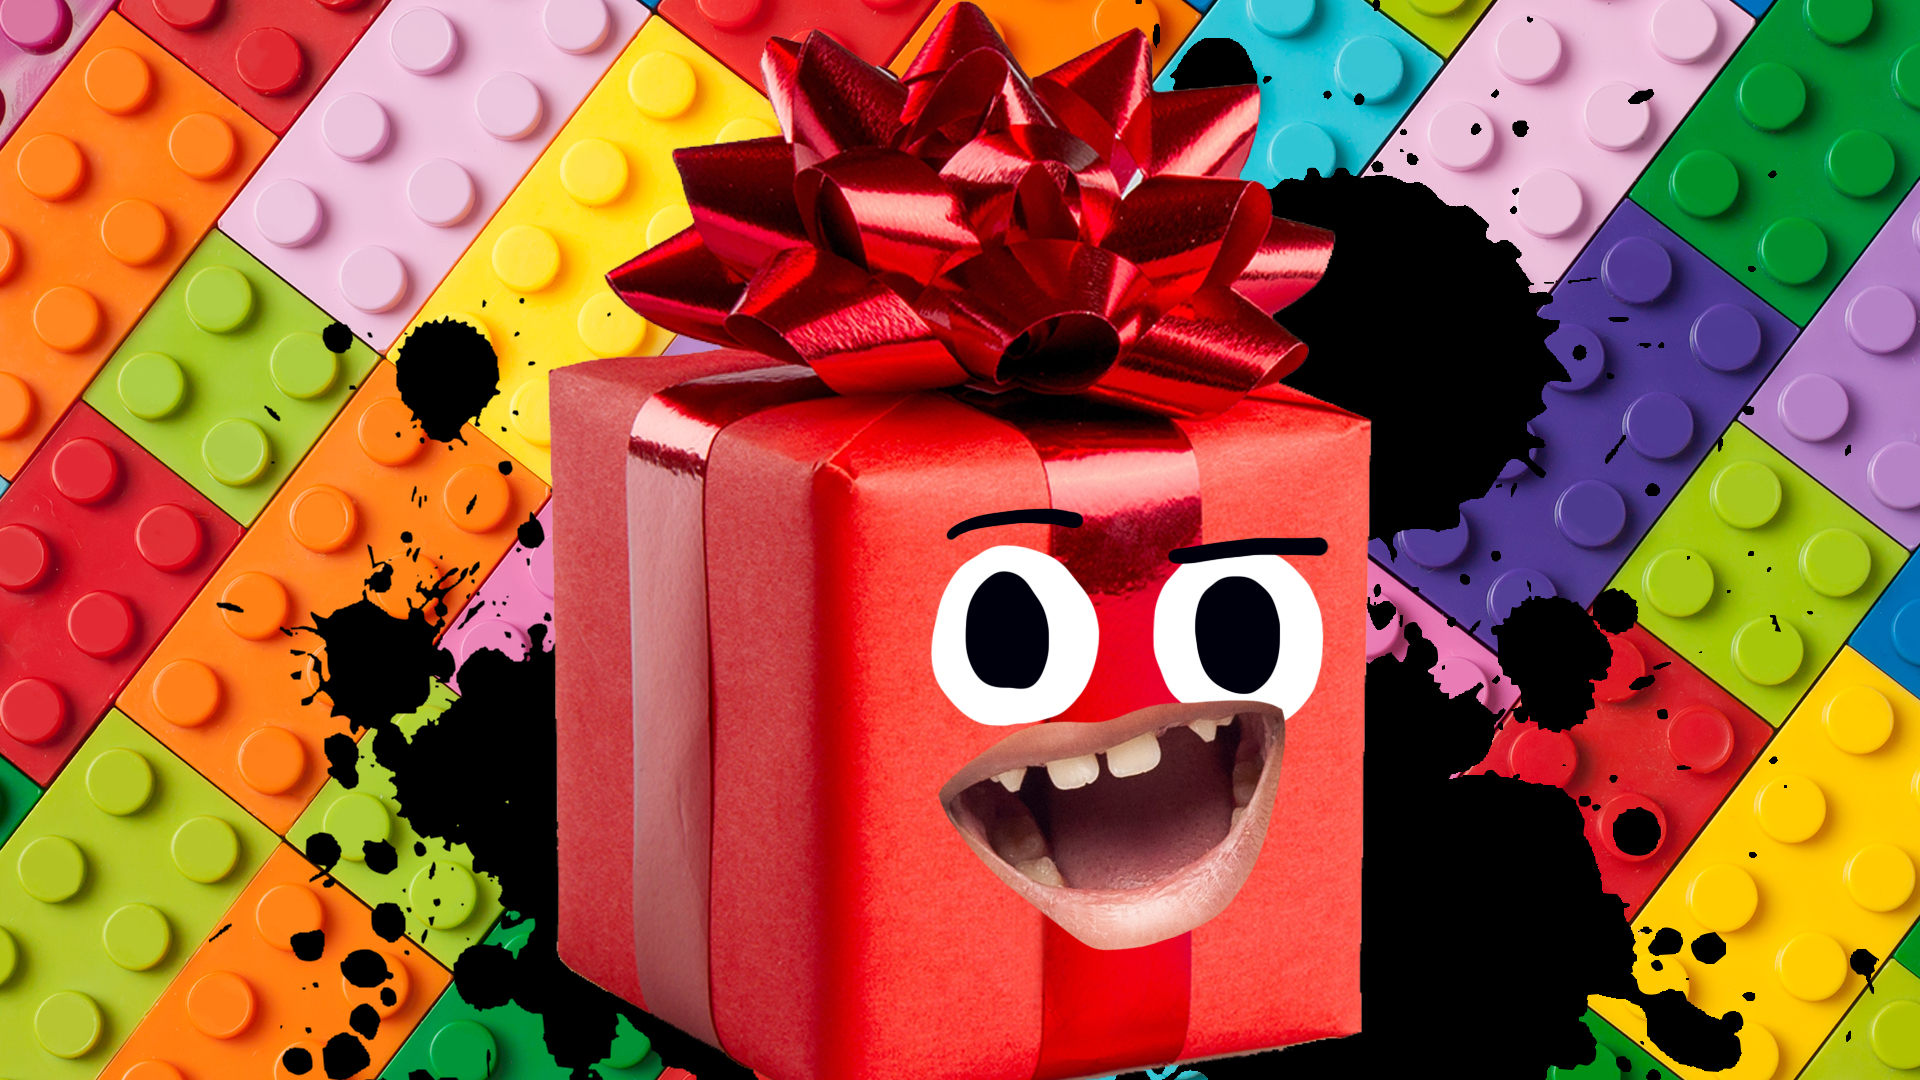 A wrapped gift and background of Lego